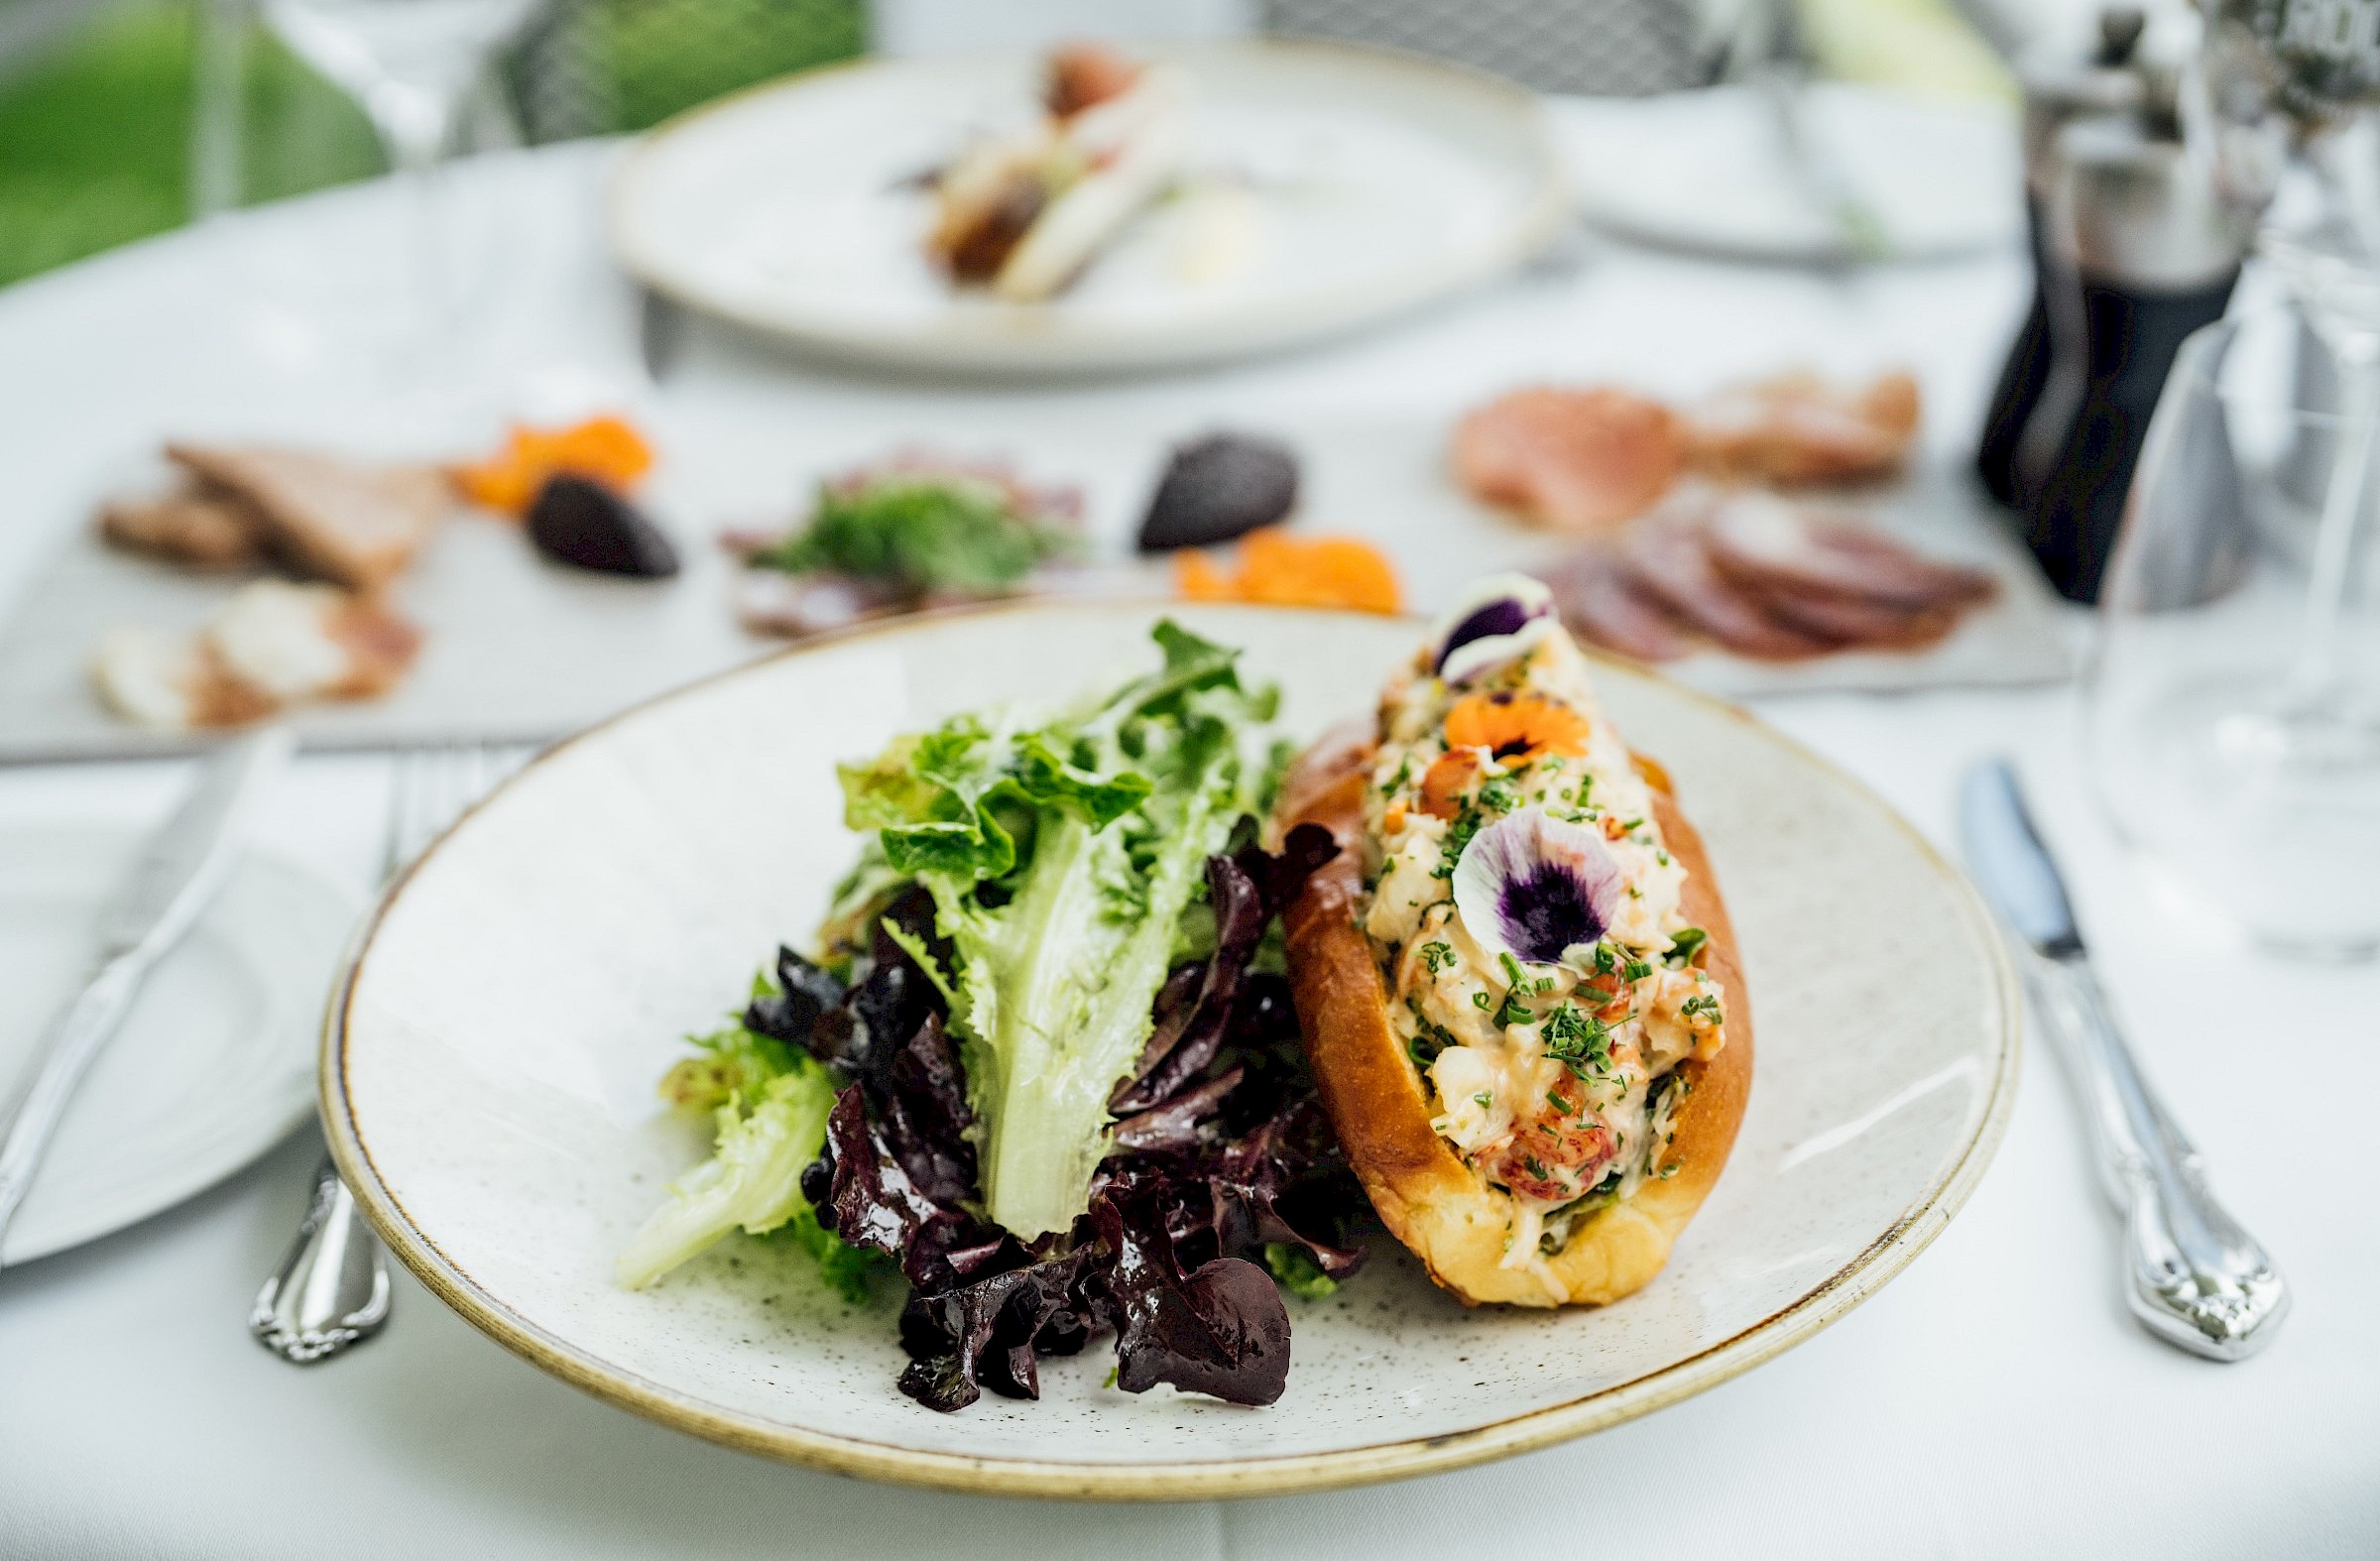 Lobster roll with salad